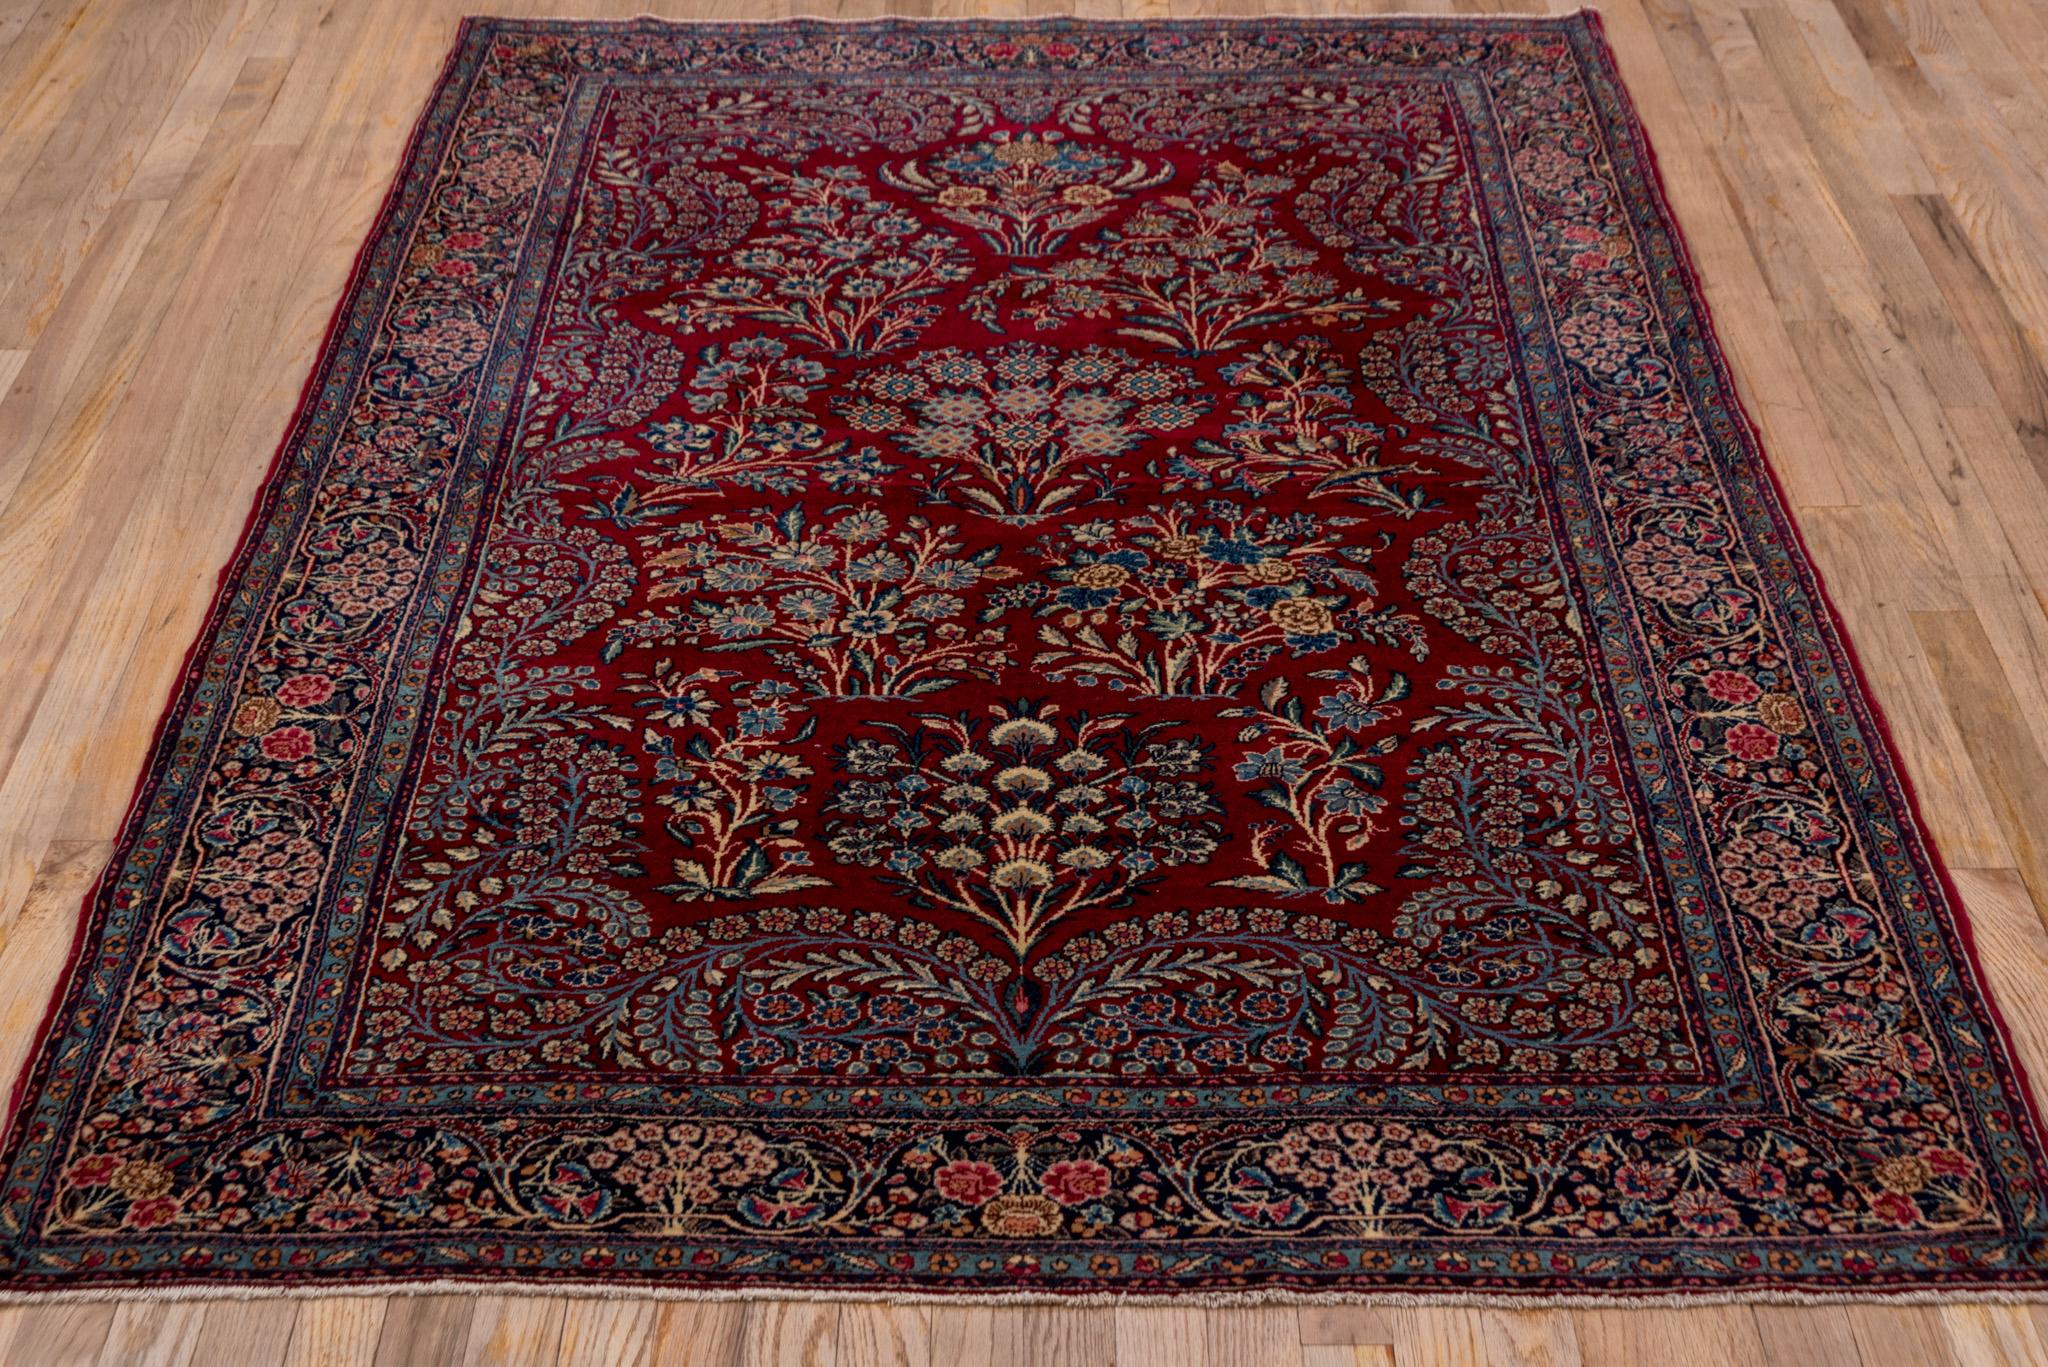 A Kerman Rug circa 1930. Hand Knotted and made of 100% wool yarn.